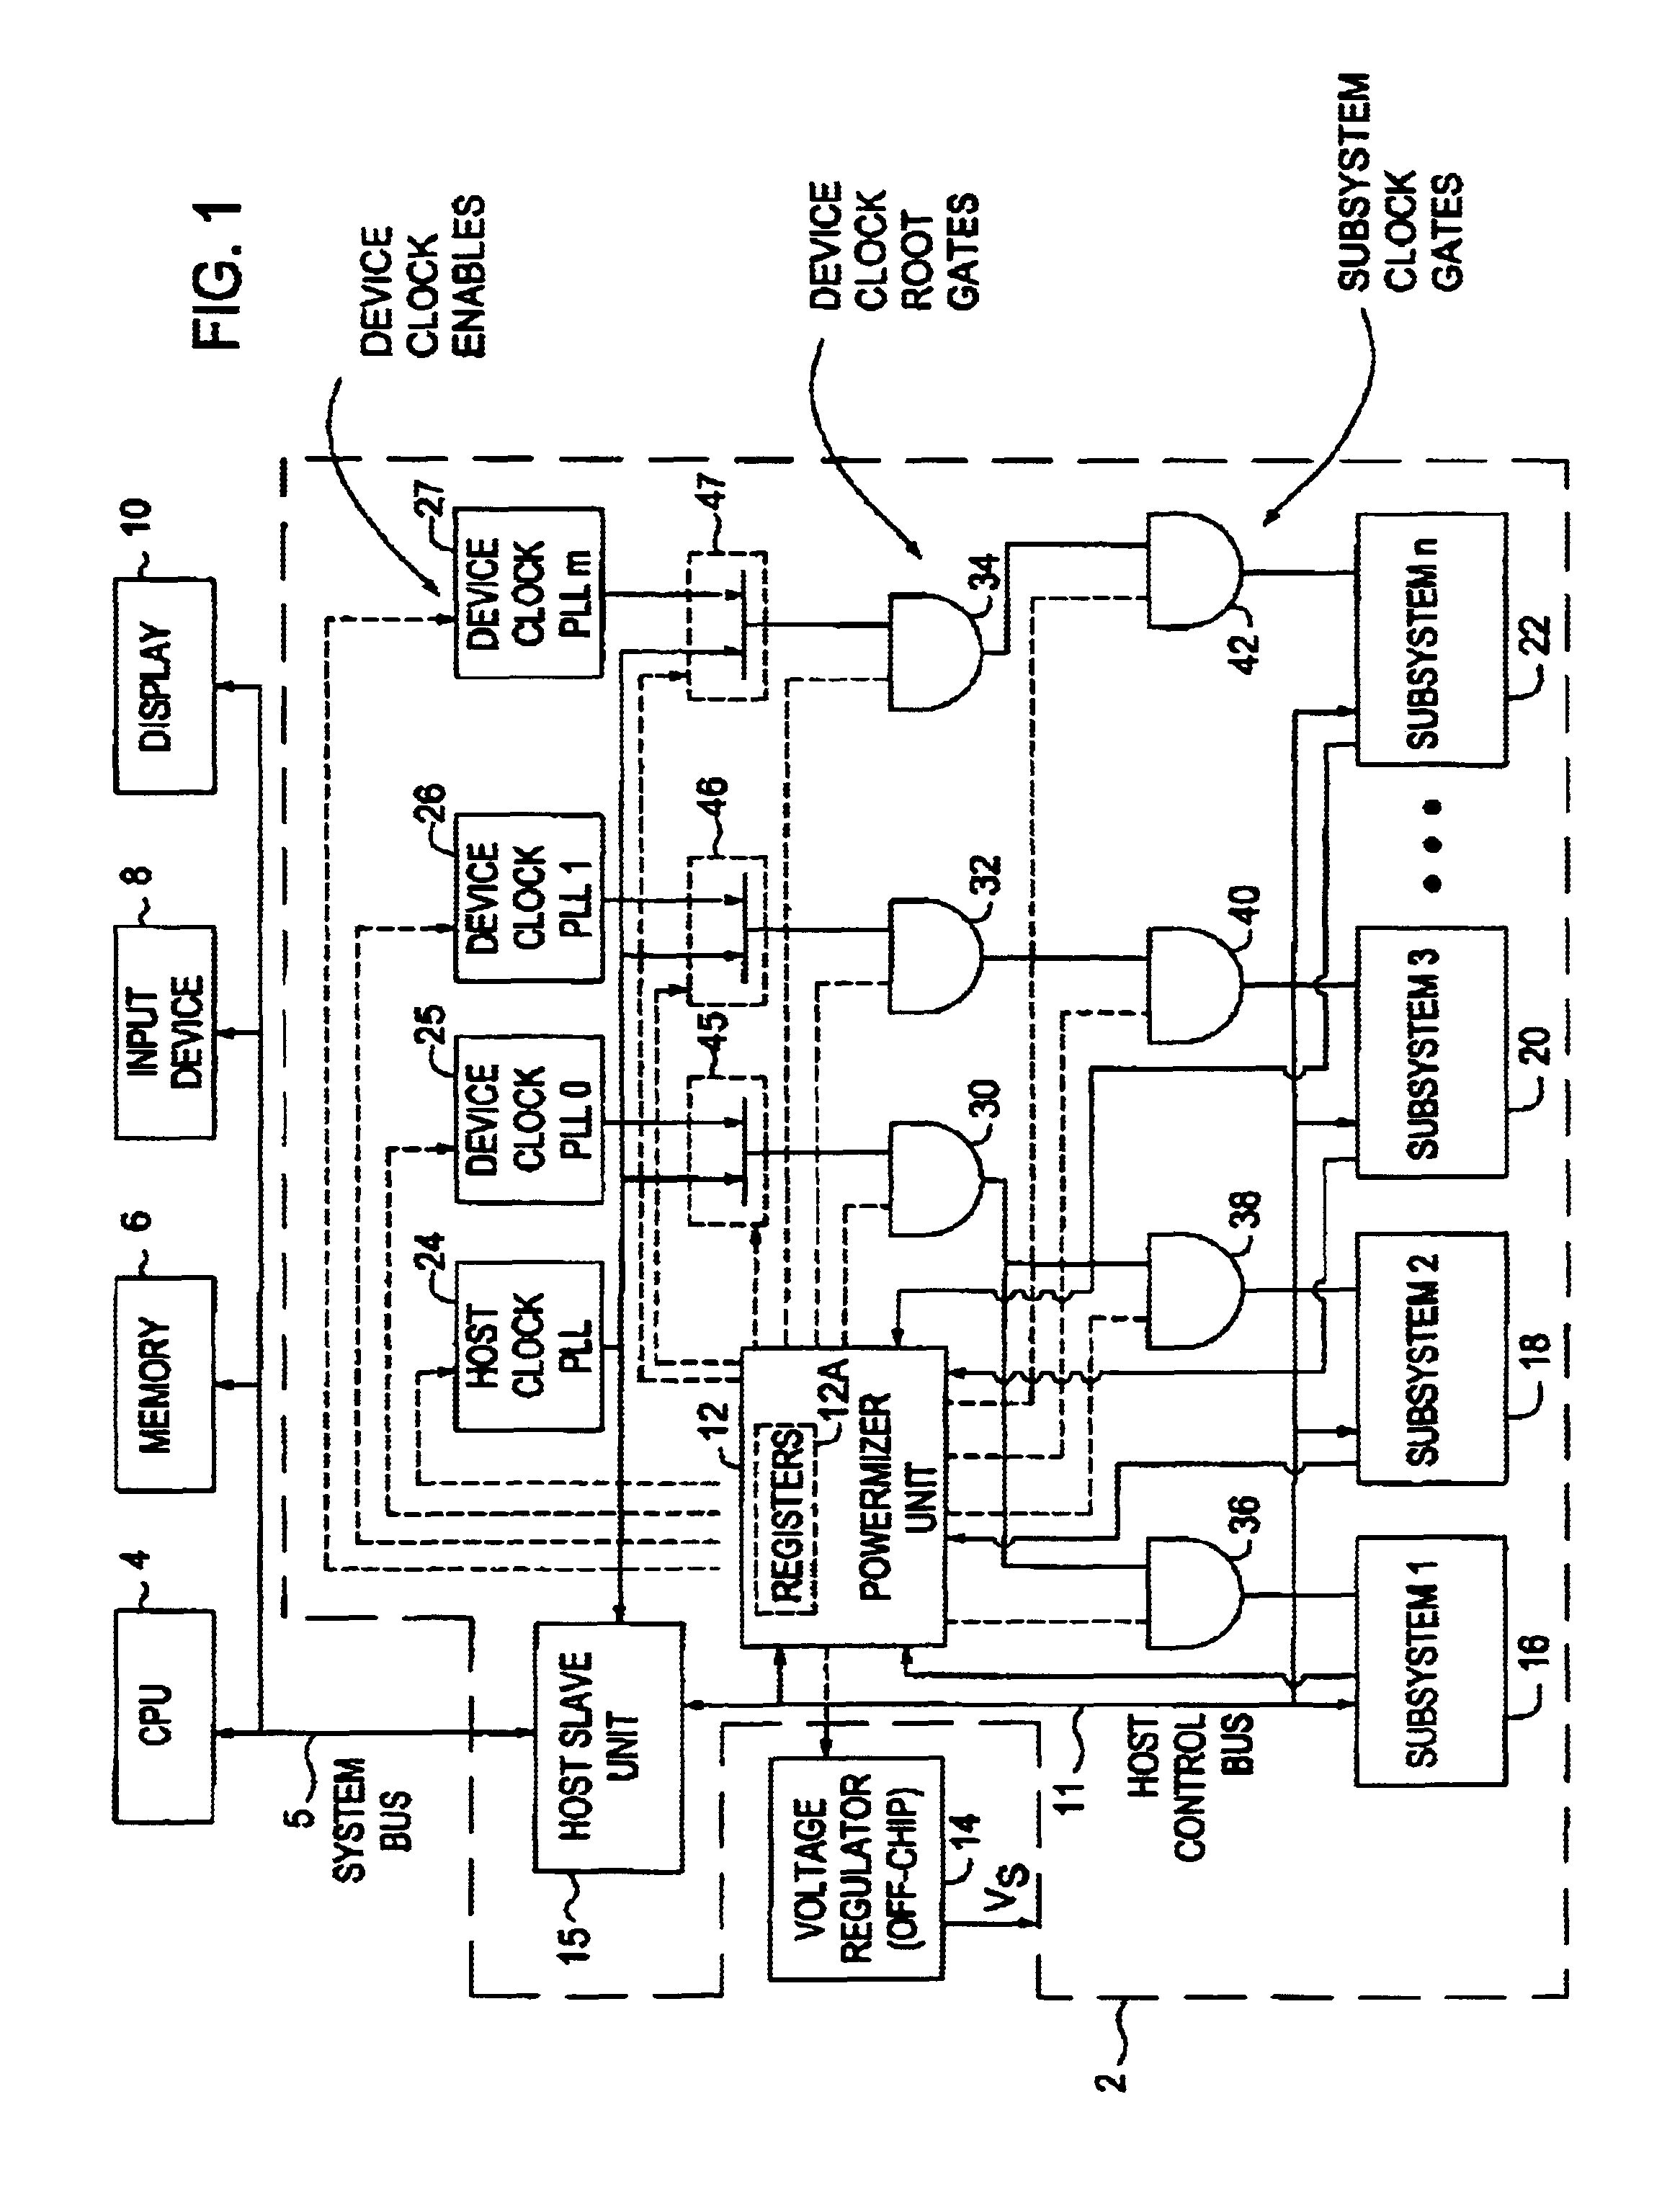 Method and apparatus for power management of graphics processors and subsystems that allow the subsystems to respond to accesses when subsystems are idle